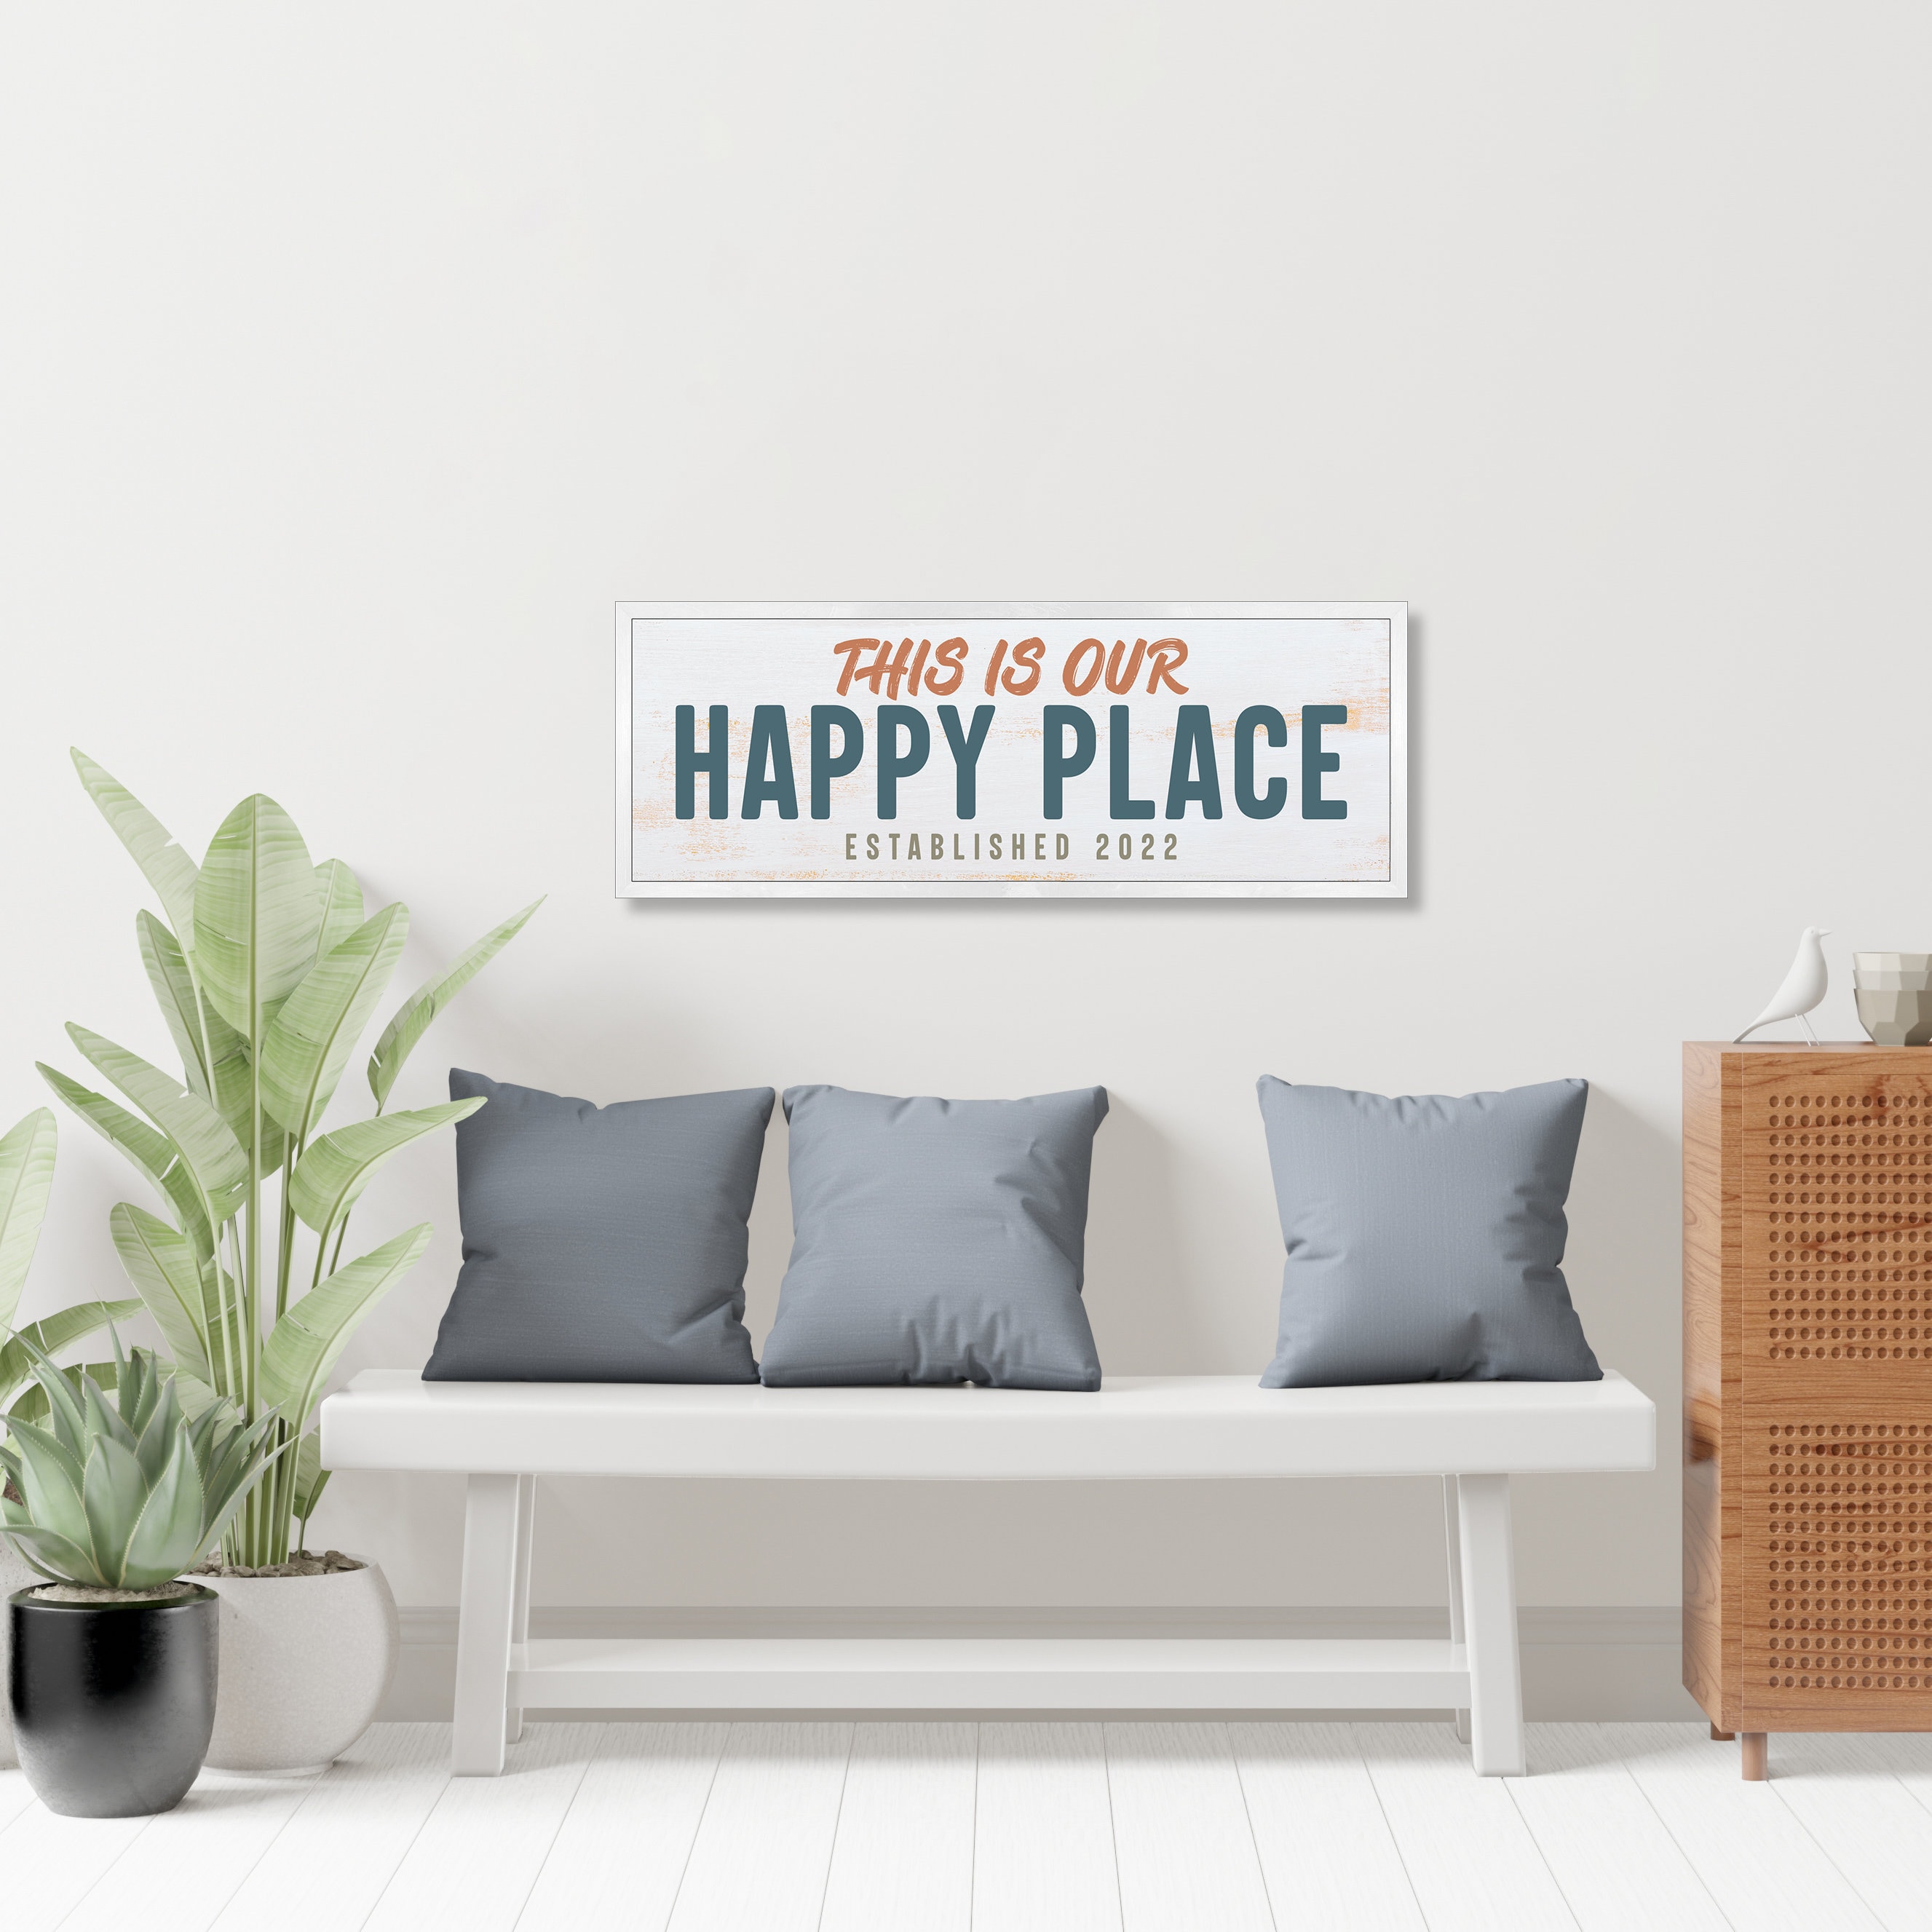 This is our happy place sign-above couch wall decor-living room wall  decor-family established sign-gift for family-home decor farmhouse